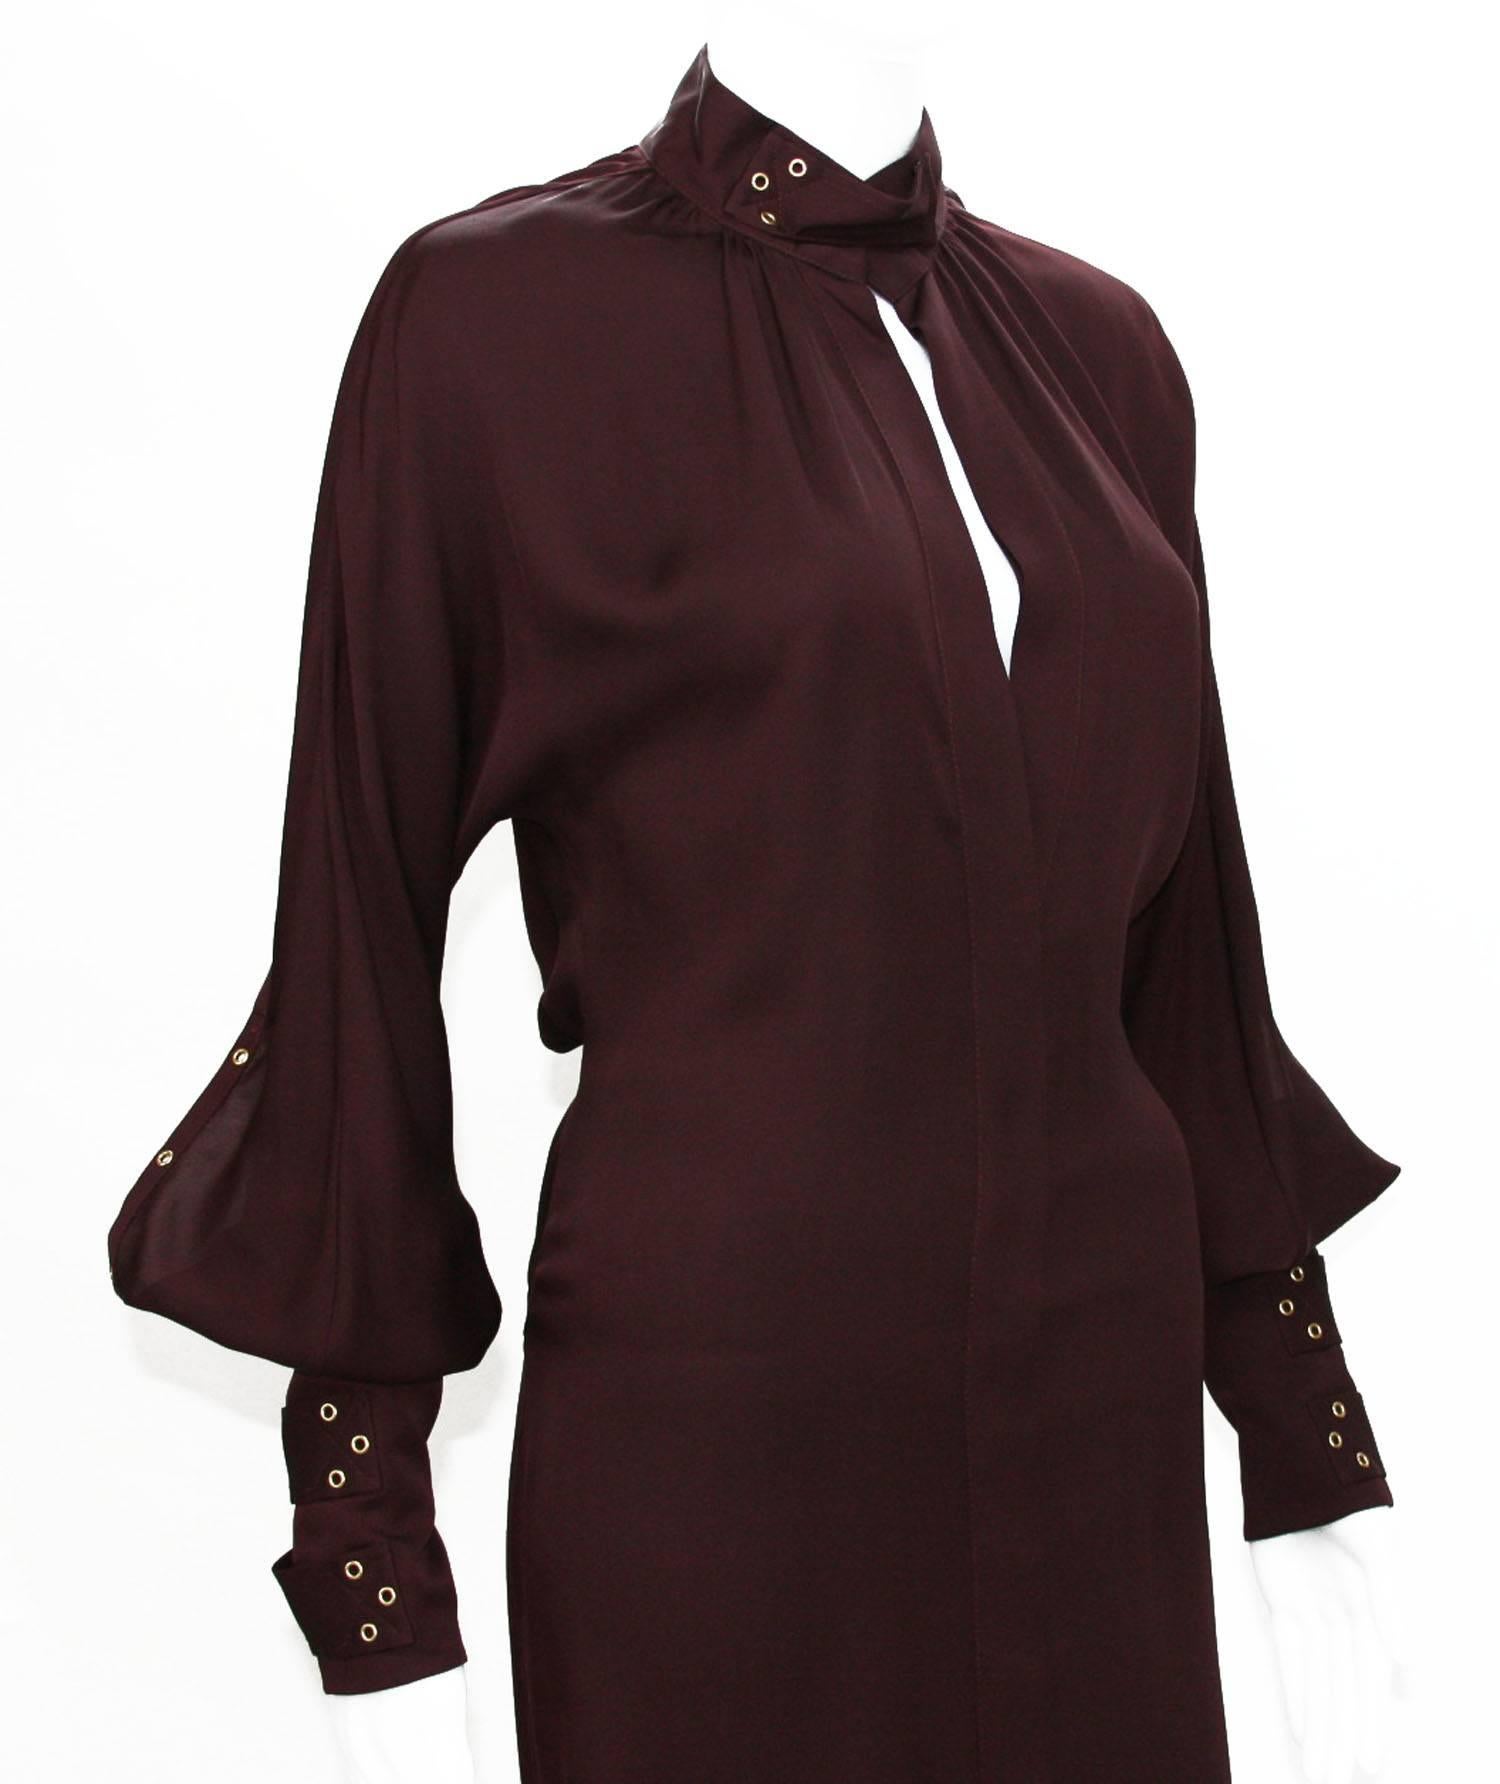 Tom Ford for Gucci 2003 Collection 3x Buckle Grommet Sleeve Burgundy Dress 40 -  For Sale 1